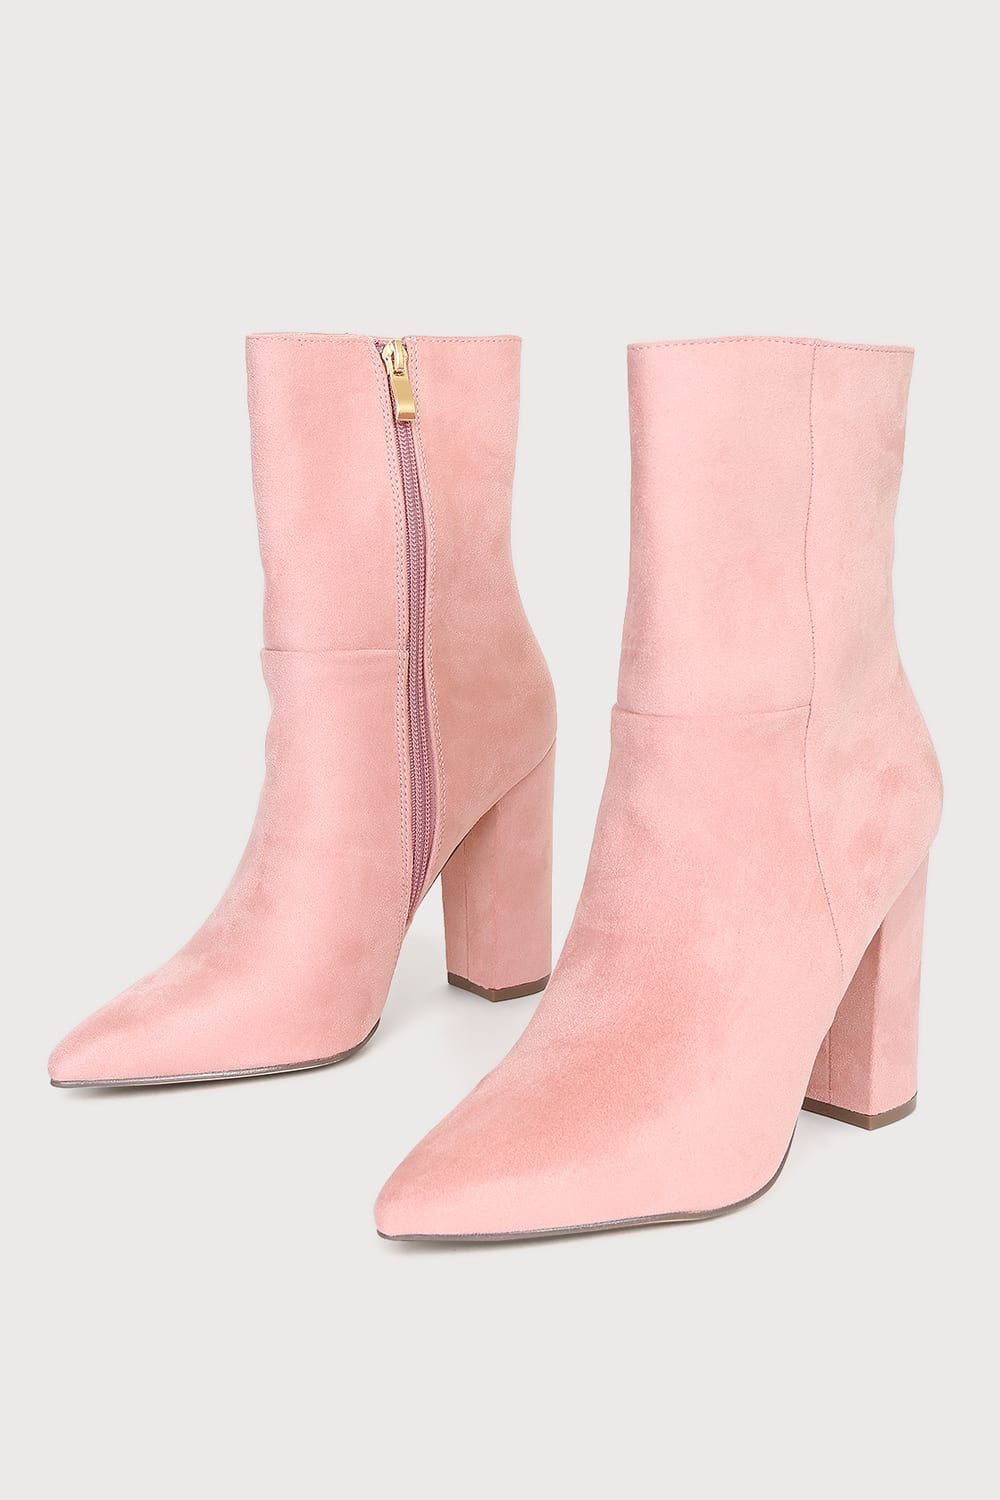 Dawson Pink Suede Pointed-Toe Mid Calf Boots | Lulus (US)